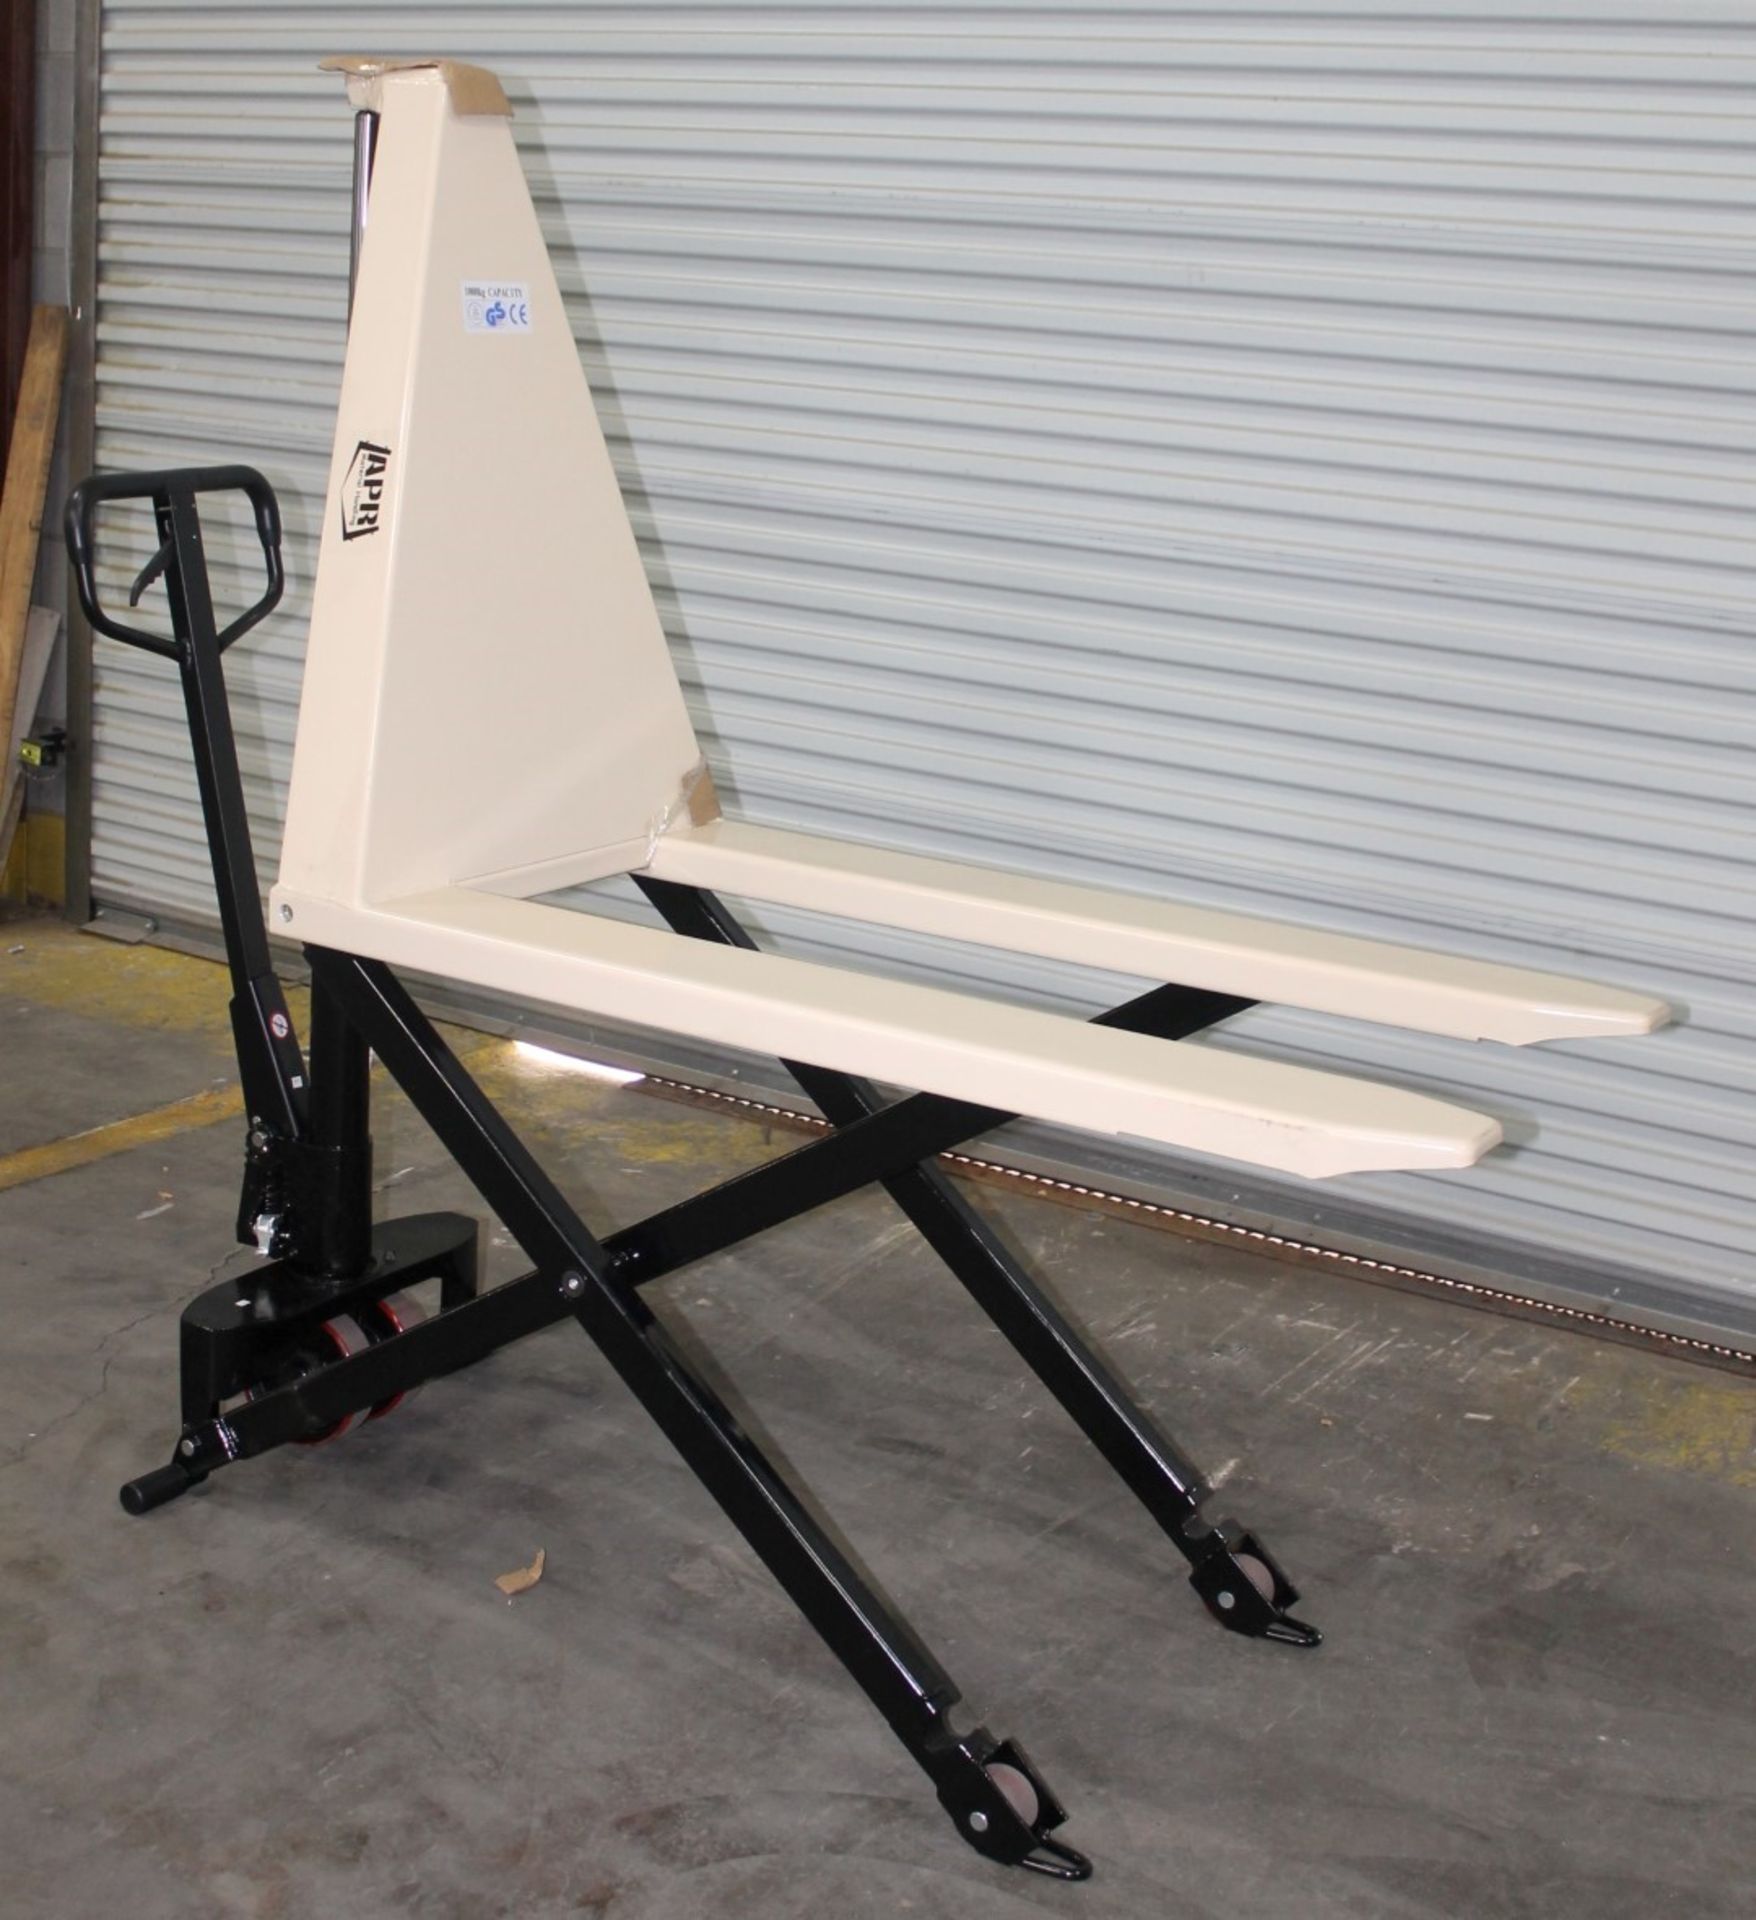 HIGH LIFT PALLET TRUCK,  CAPACITY: 2200 lb, FORK SIZE: 27" x 48", LOWERED FORK HEIGHT: 3.35 - Image 4 of 5